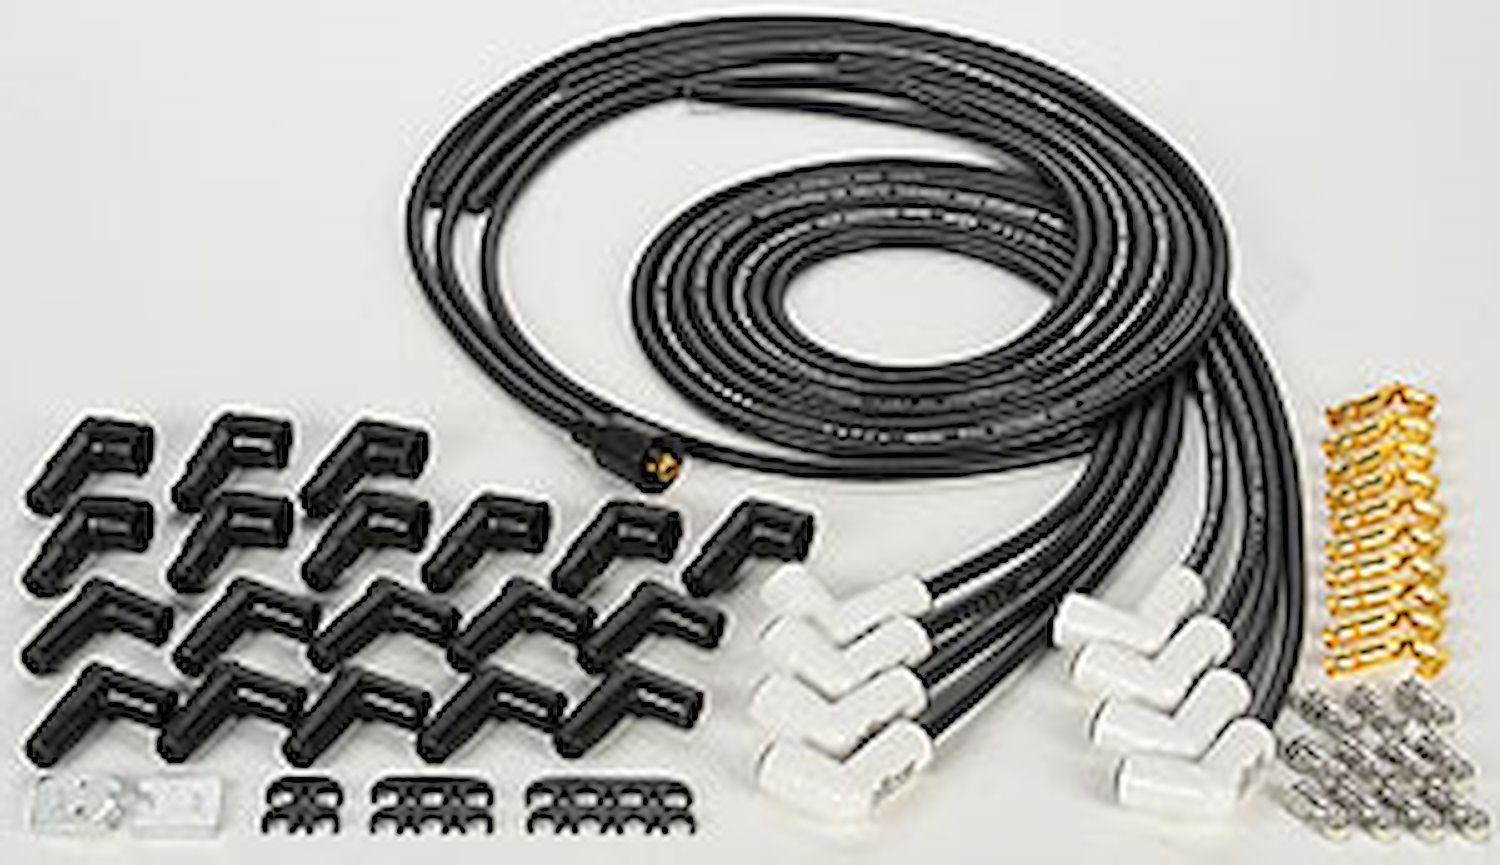 ACCEL 9001C Extreme 9000 Spark Plug Wire Set - Universal - 90 Degree White  Ceramic Boots